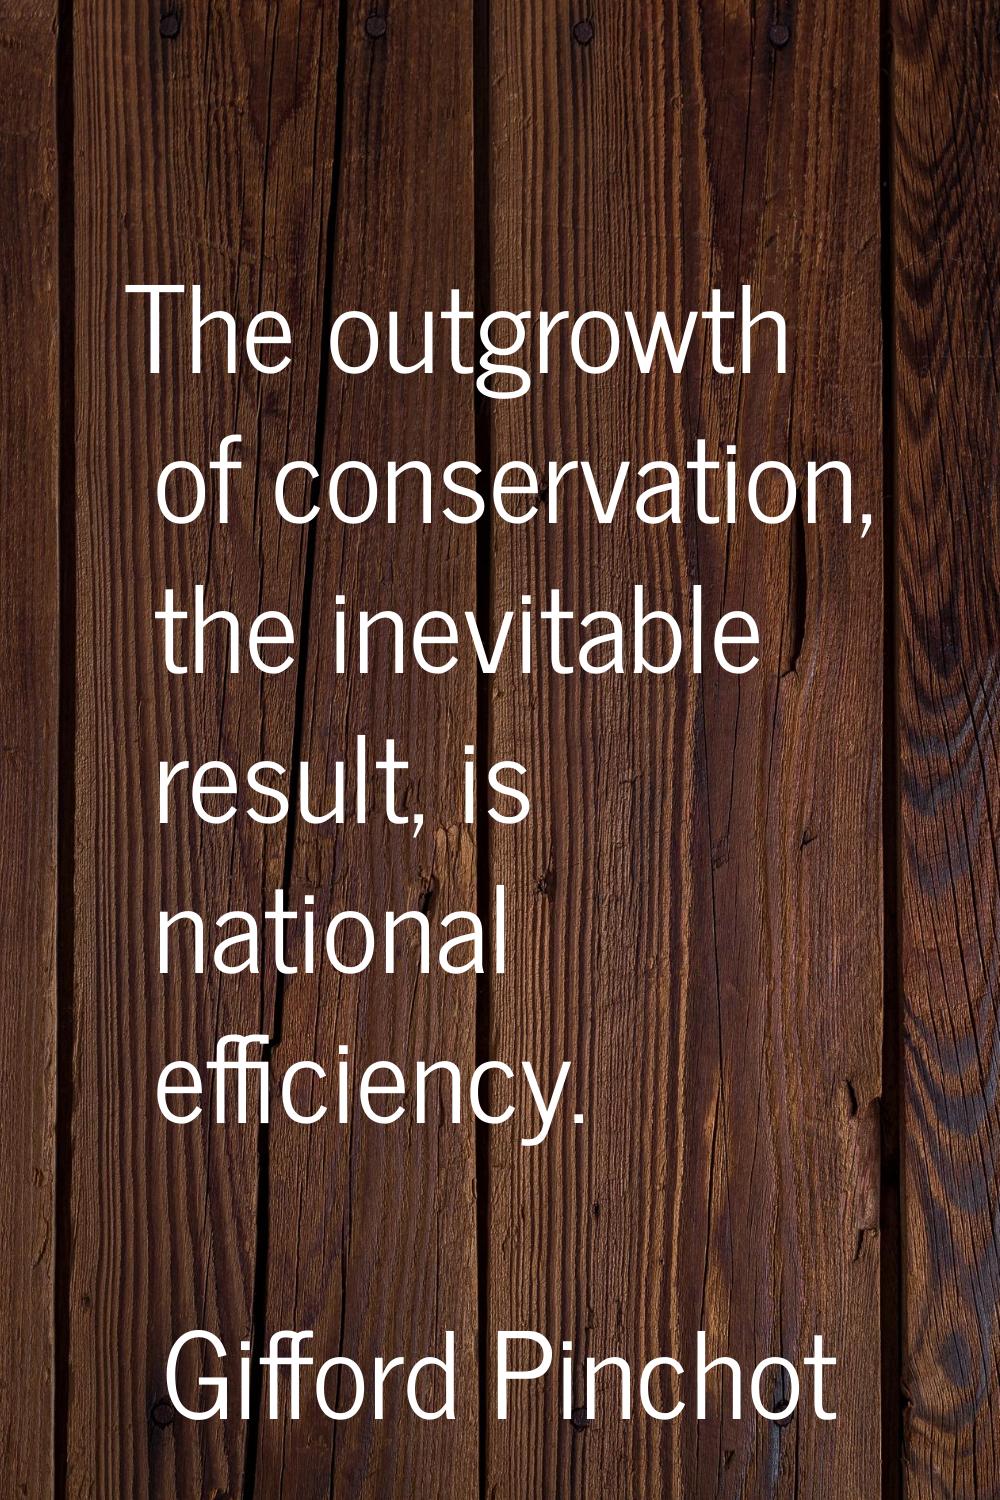 The outgrowth of conservation, the inevitable result, is national efficiency.